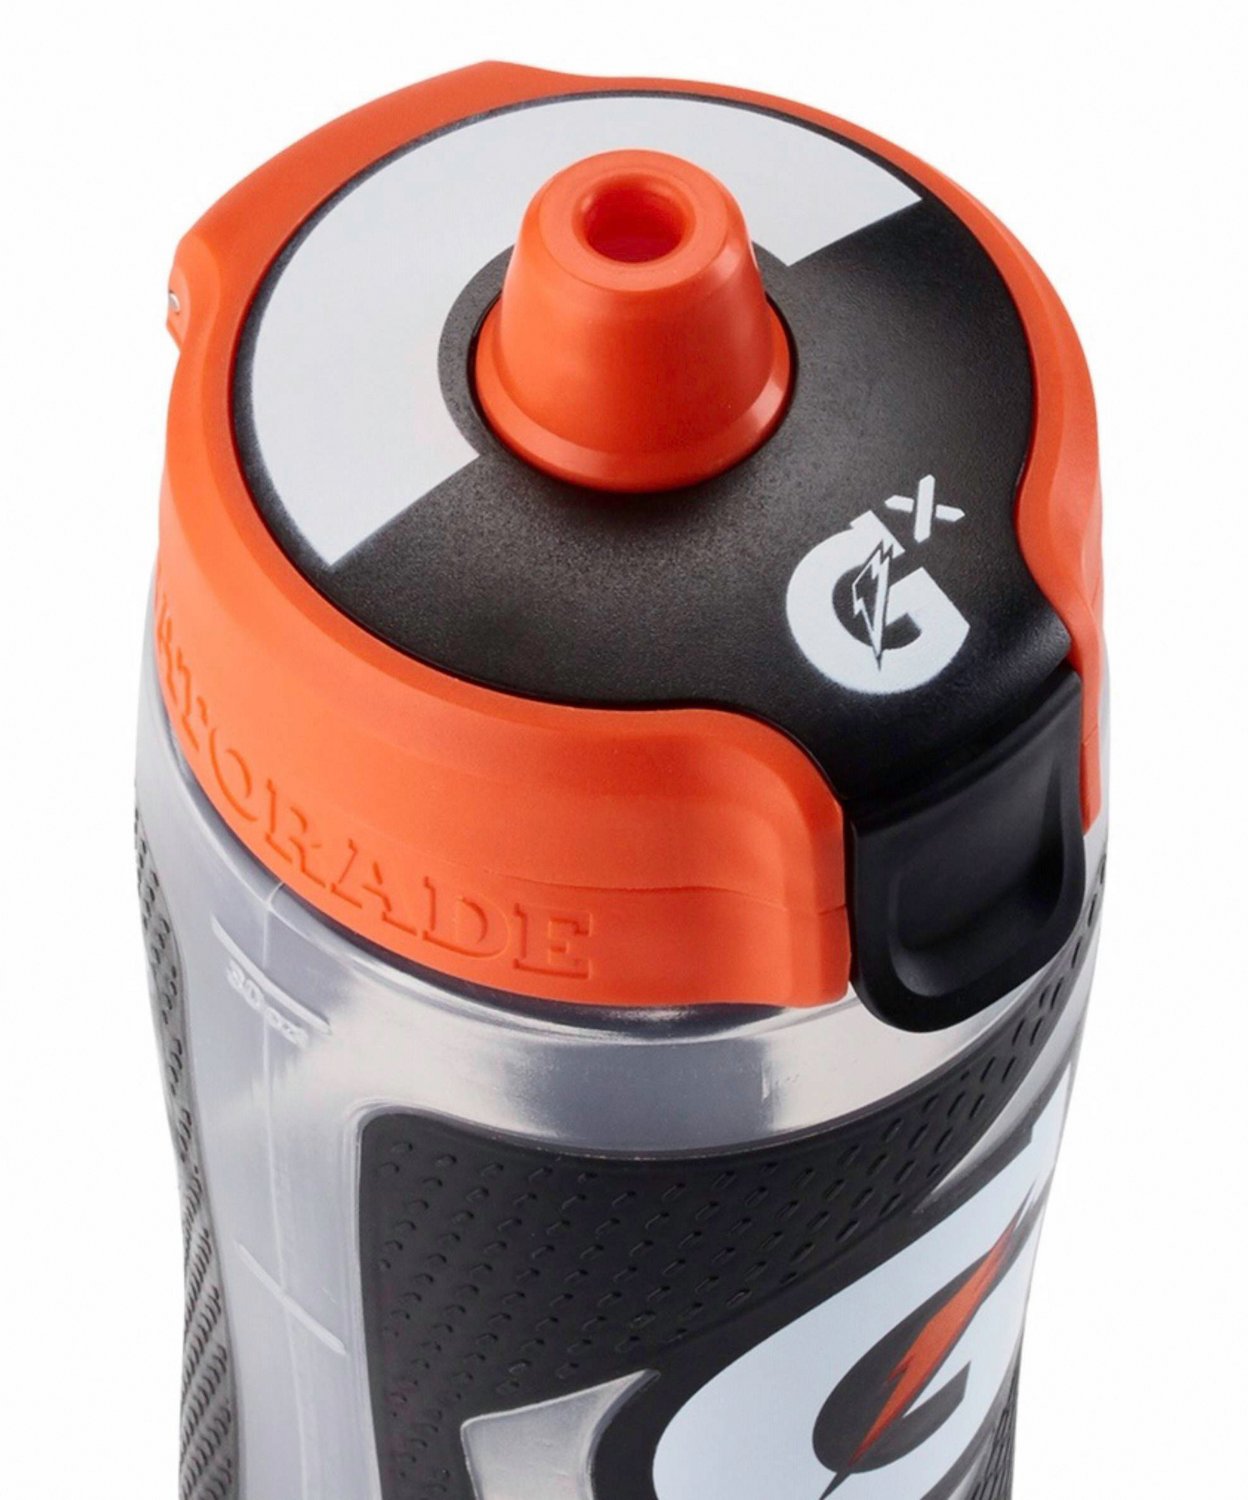 Gatorade Insulated Plastic Squeeze Bottle For Sports, Black, 30oz